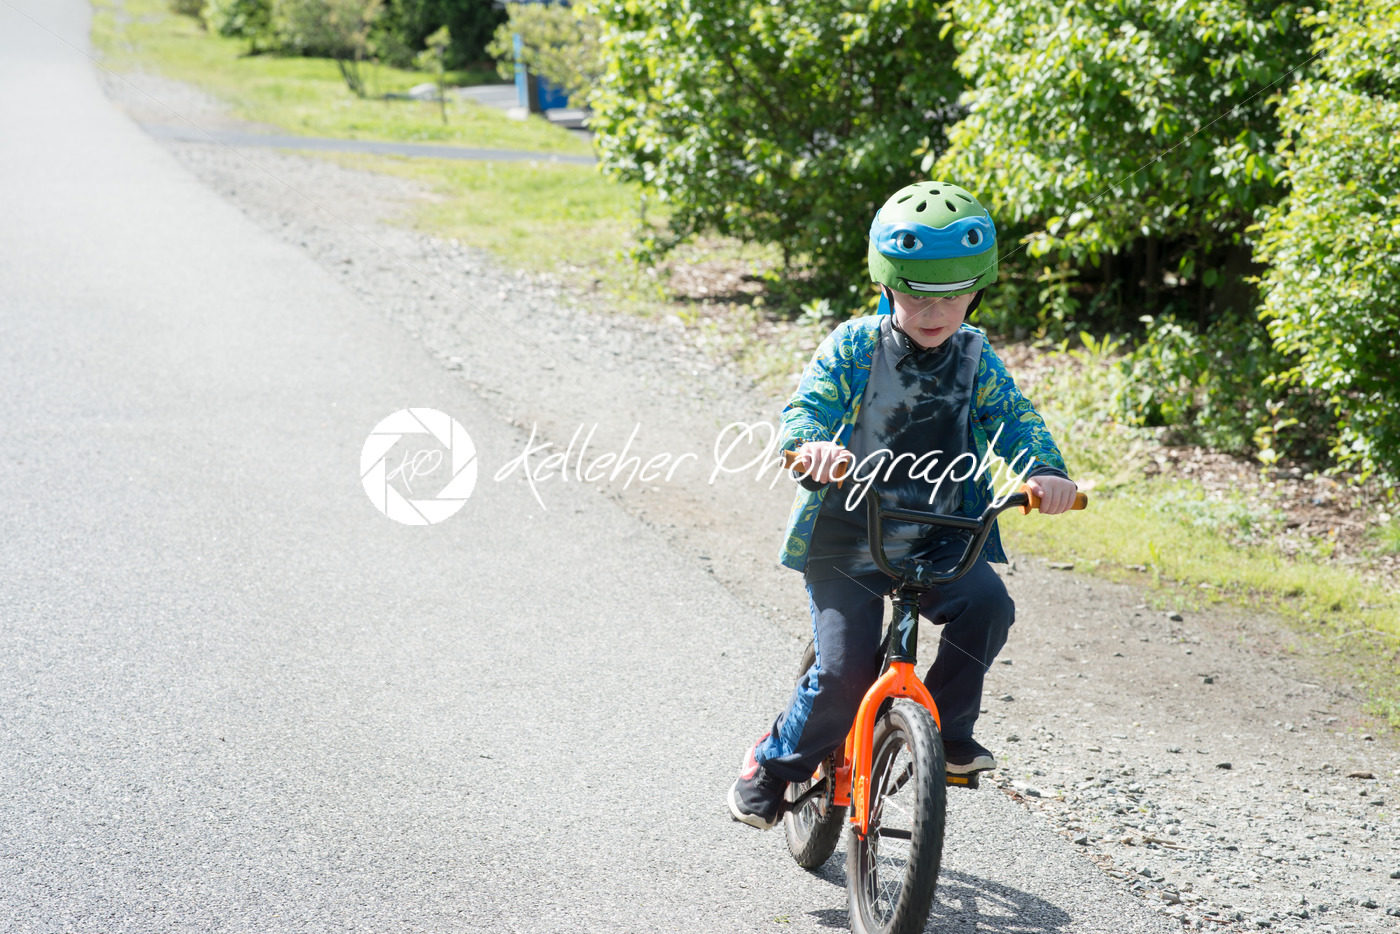 Young Boy Riding Bike on paved trail - Kelleher Photography Store